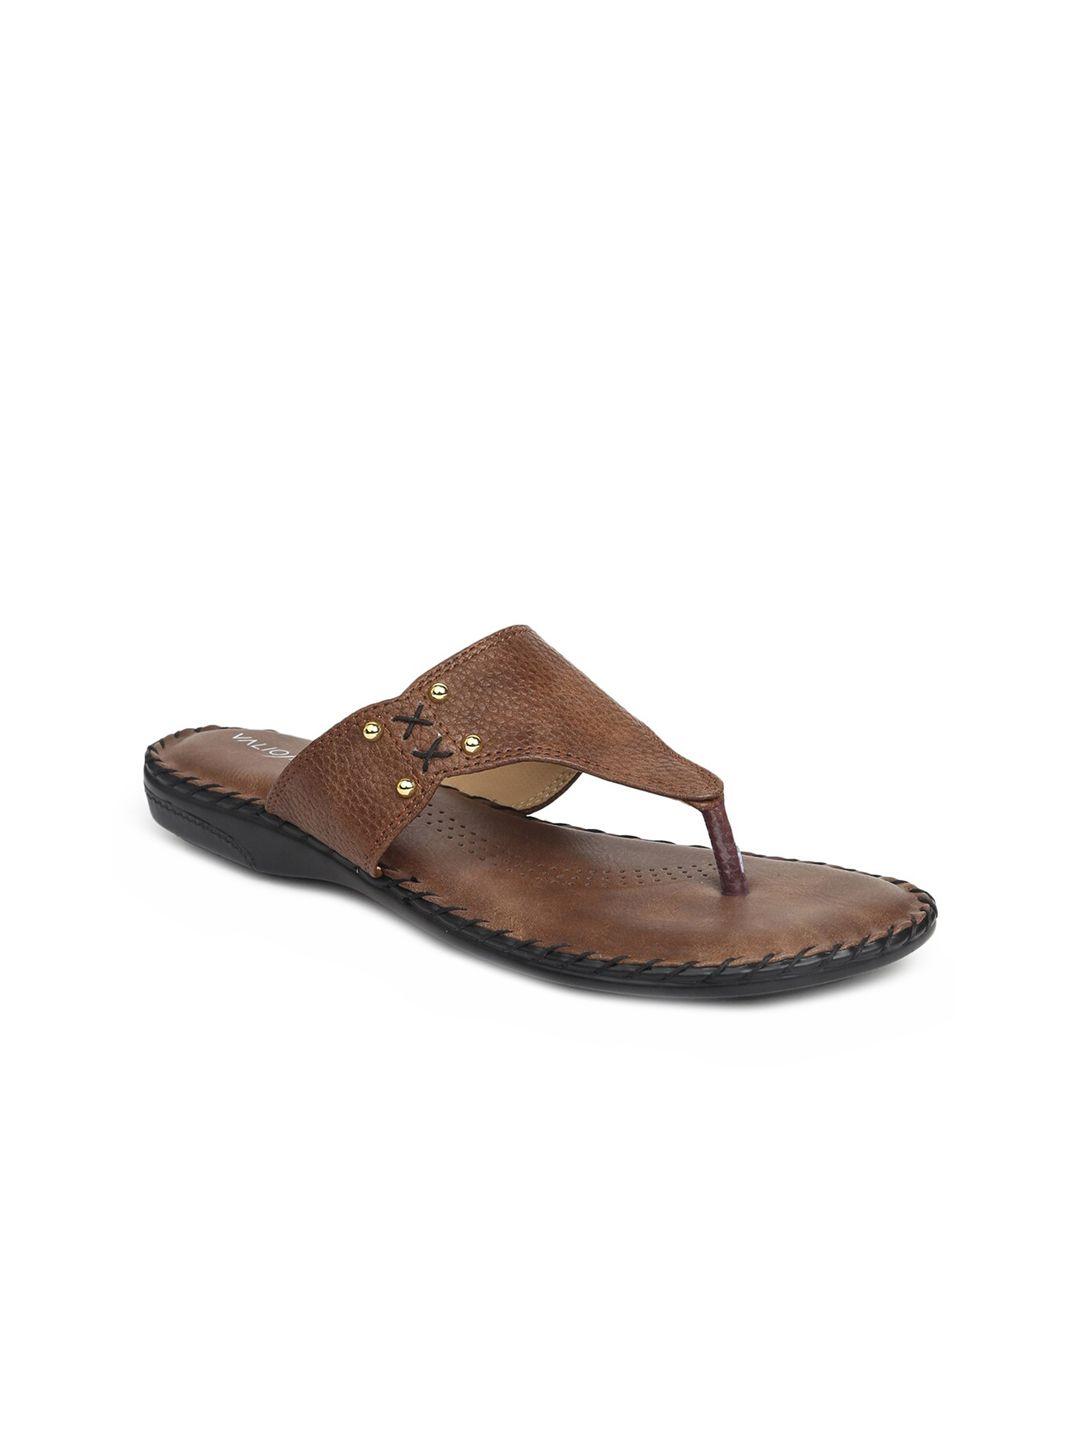 valiosaa-women-brown-t-strap-flats-with-laser-cuts